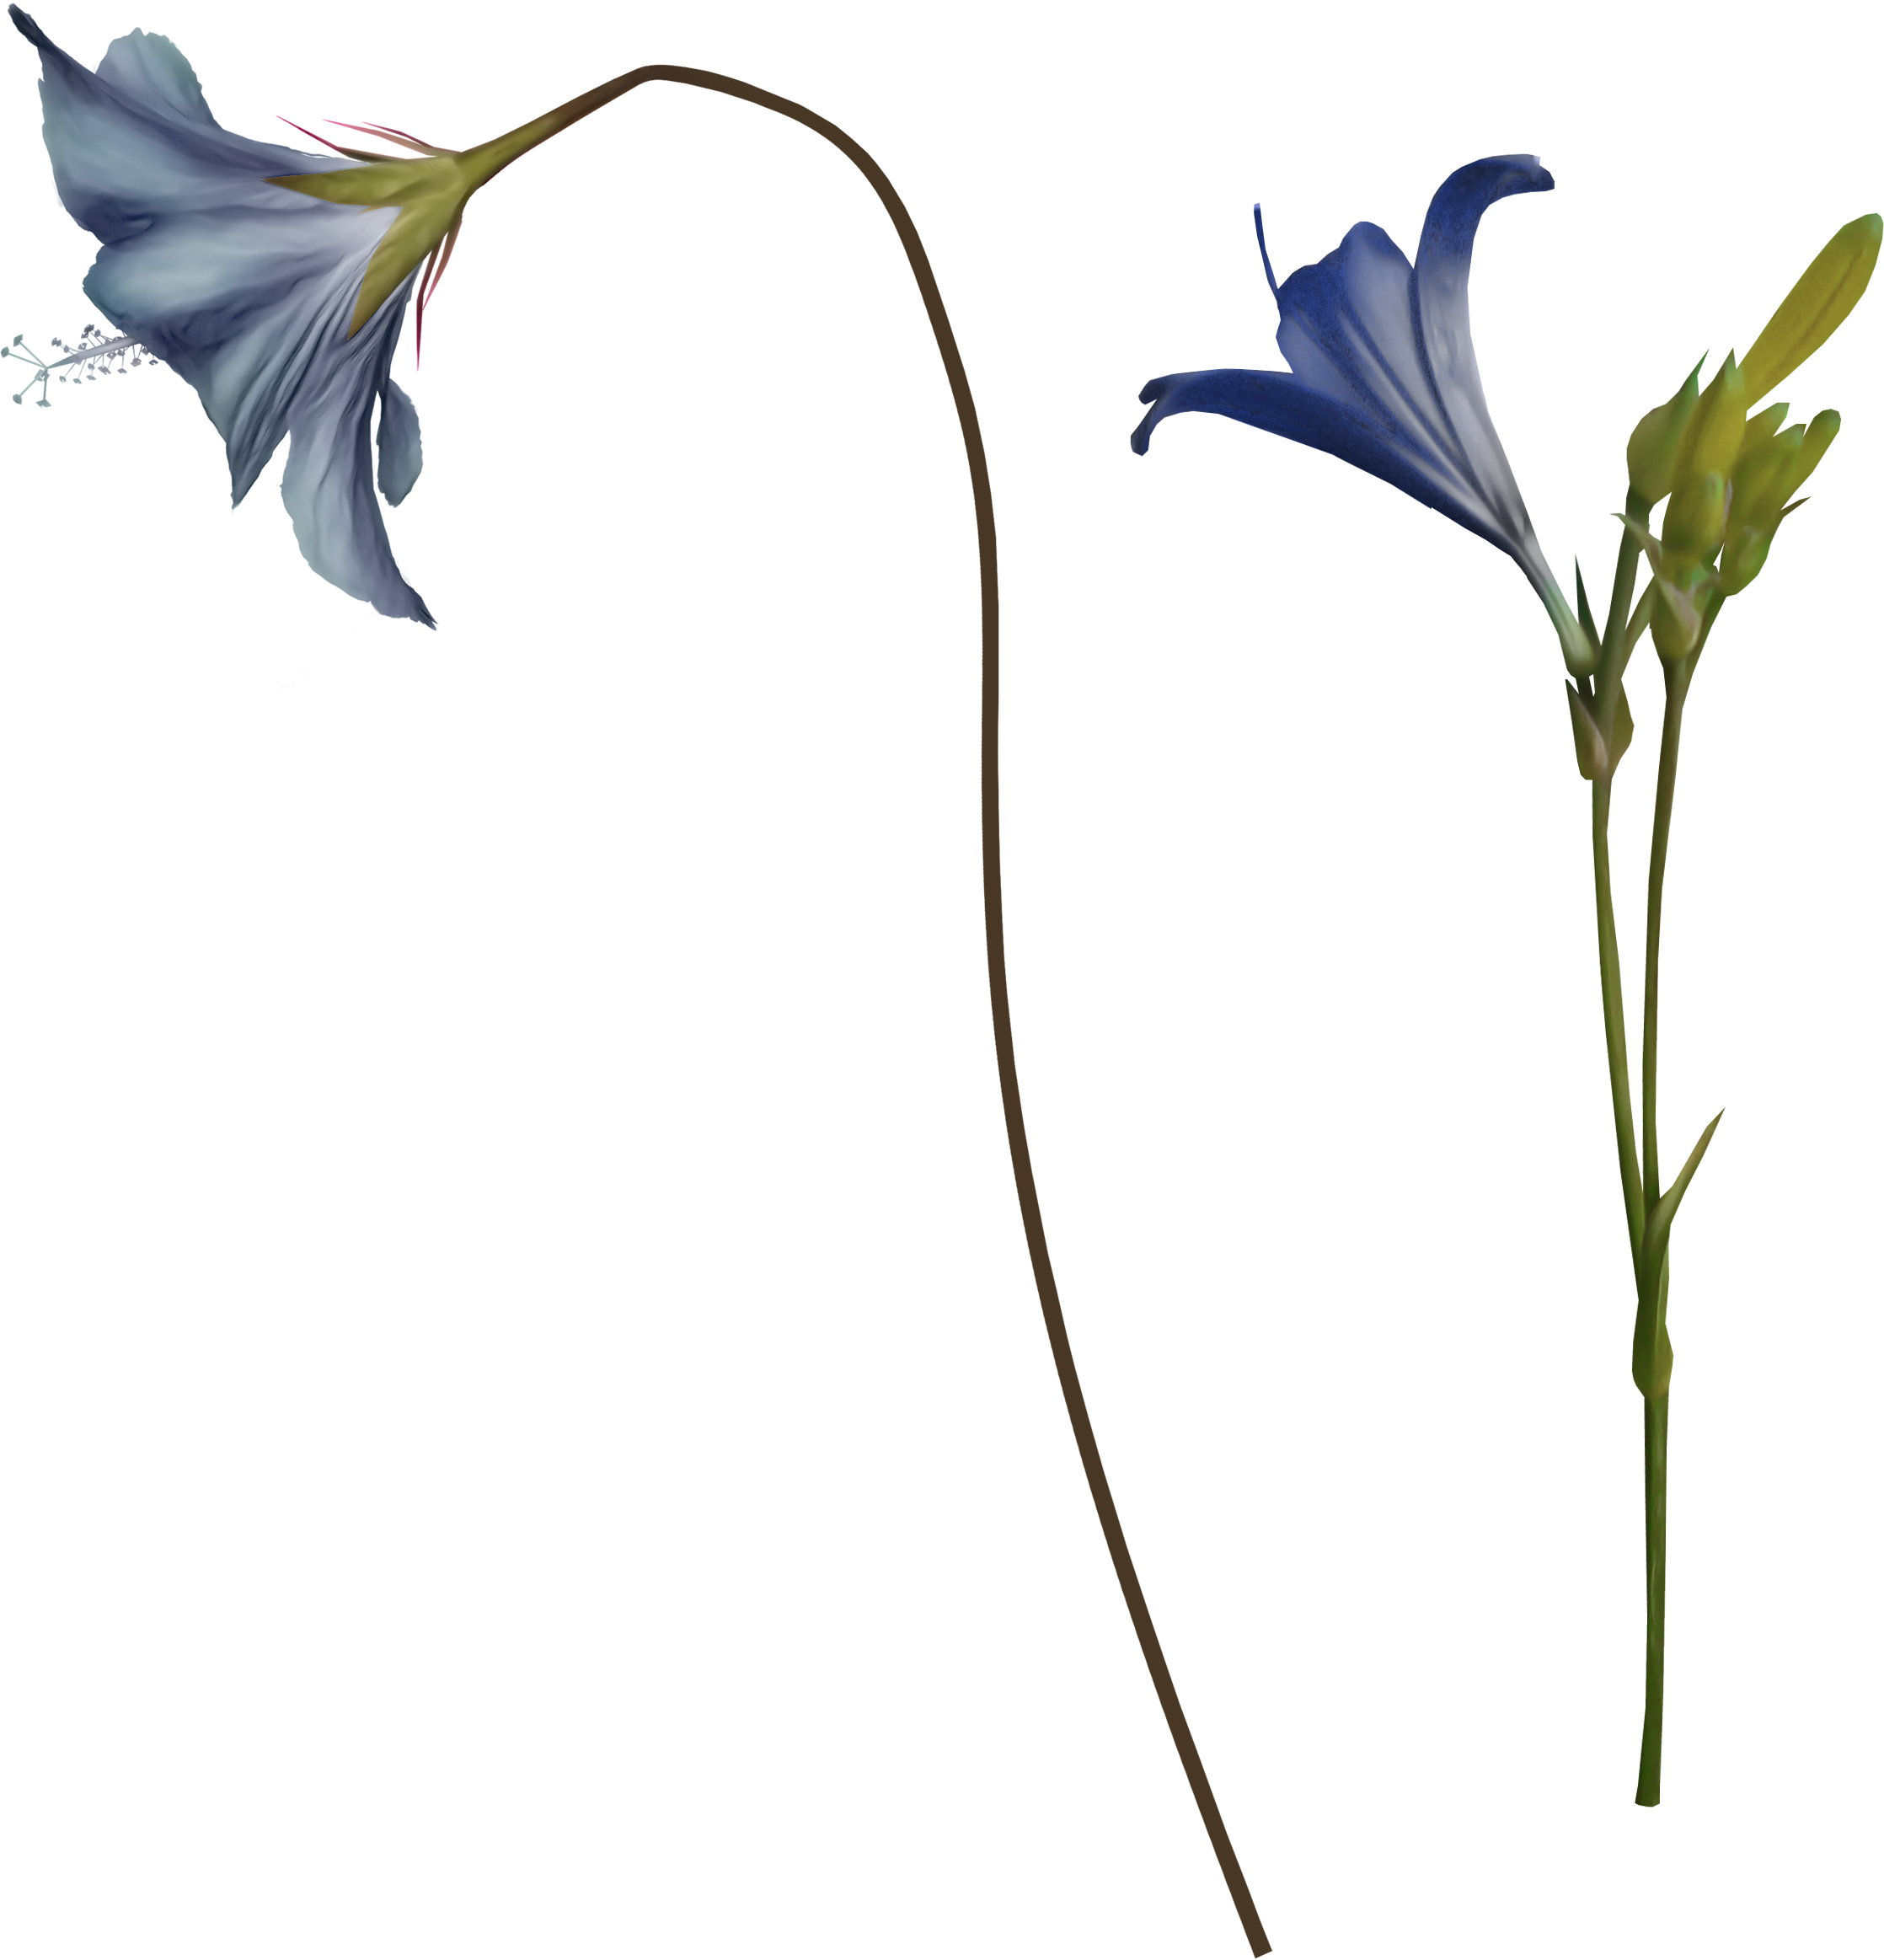 Bellflower Single Flowers Picture PNG Transparent Background, Free Download  #48723 - FreeIconsPNG